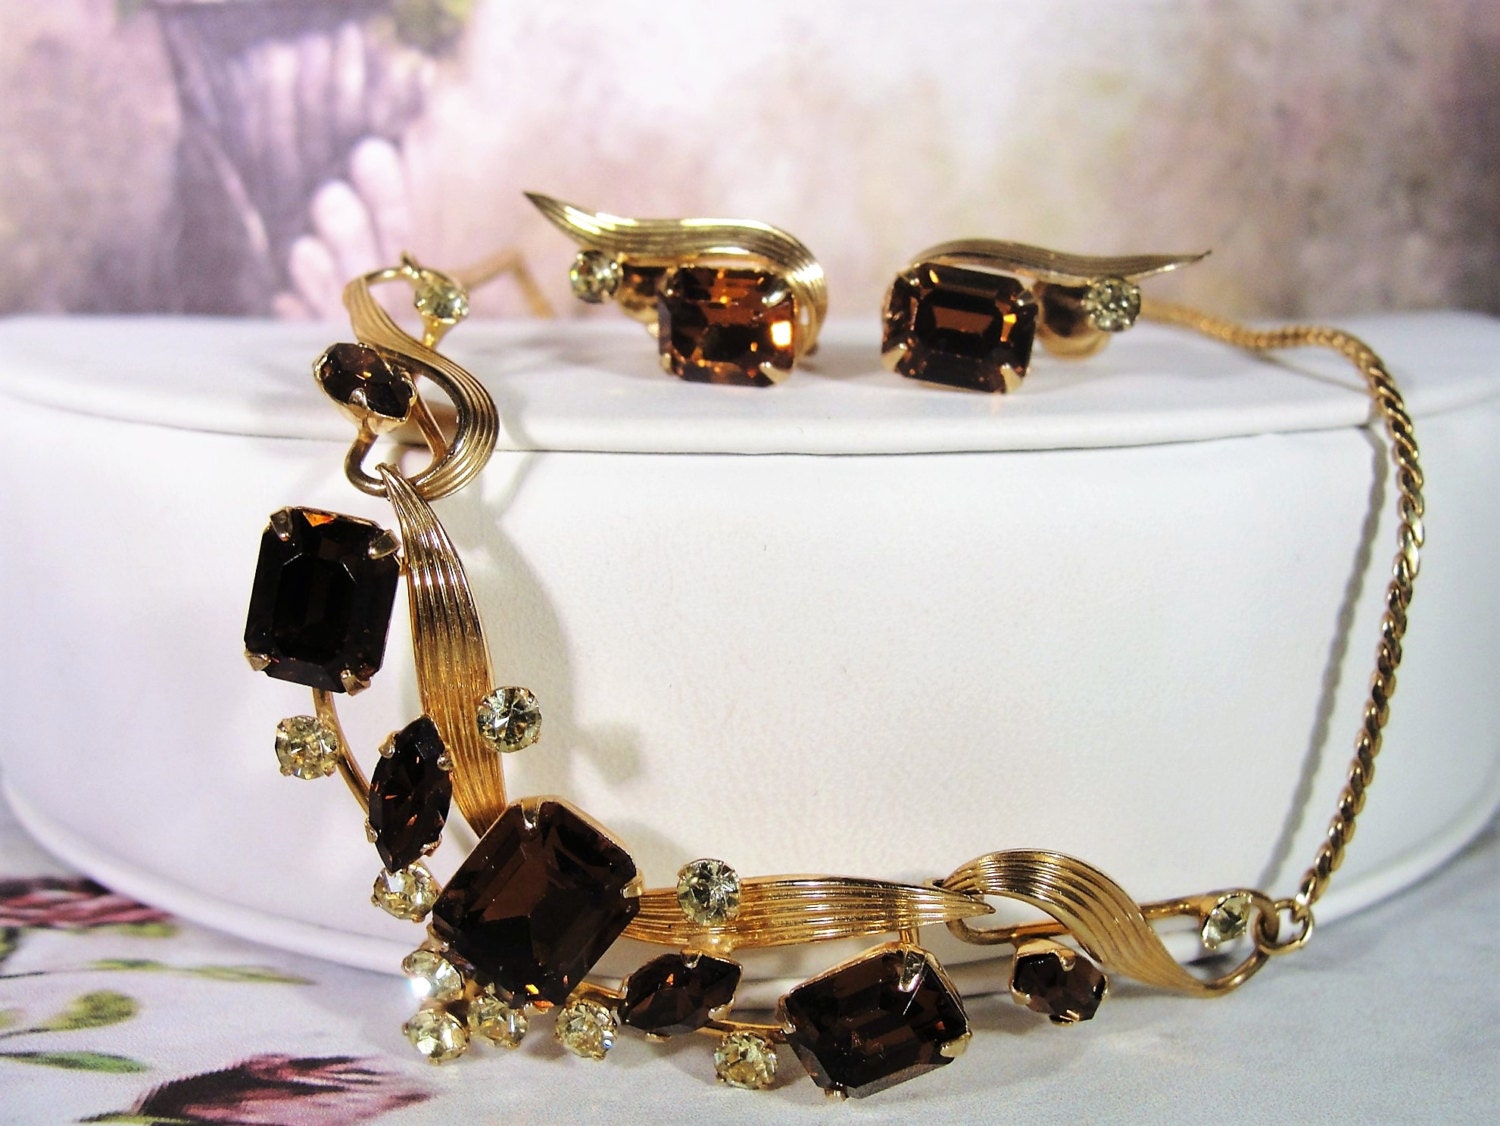 VAN DELL 1/20 12K Gold Filled Root Beer Colored Topaz Necklace and Earrings  Jewelry Set, Vintage Jewelry Set